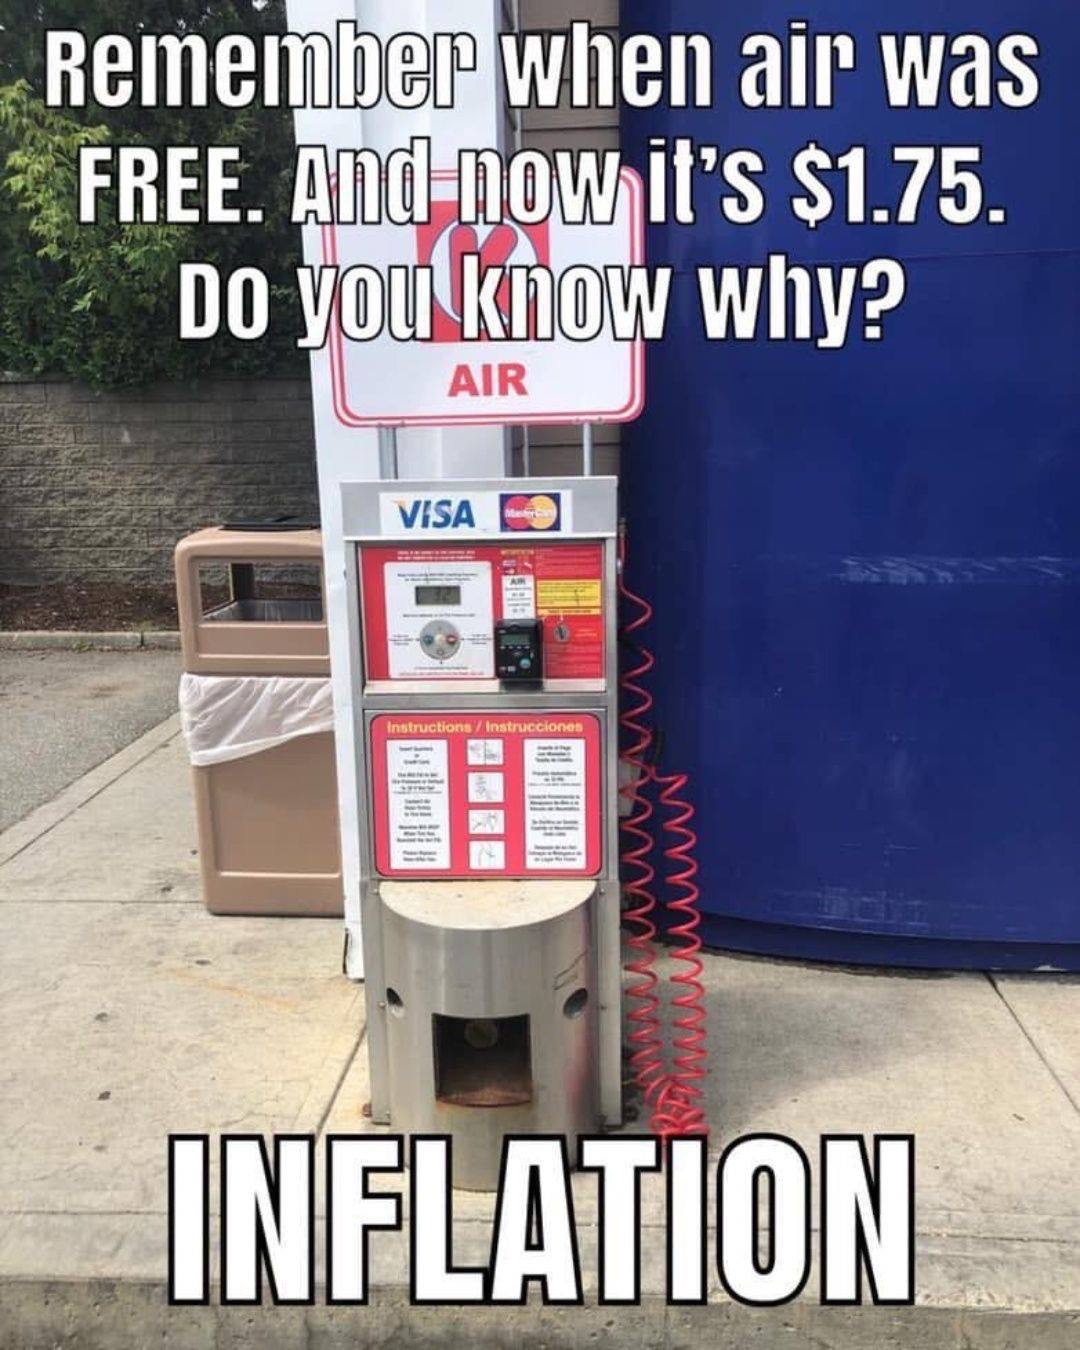 Humour - Remember when air was _FREE. And now it's $1.75. Do you know why? Air Visa M Instructions Instrucciones Wwww Inelation